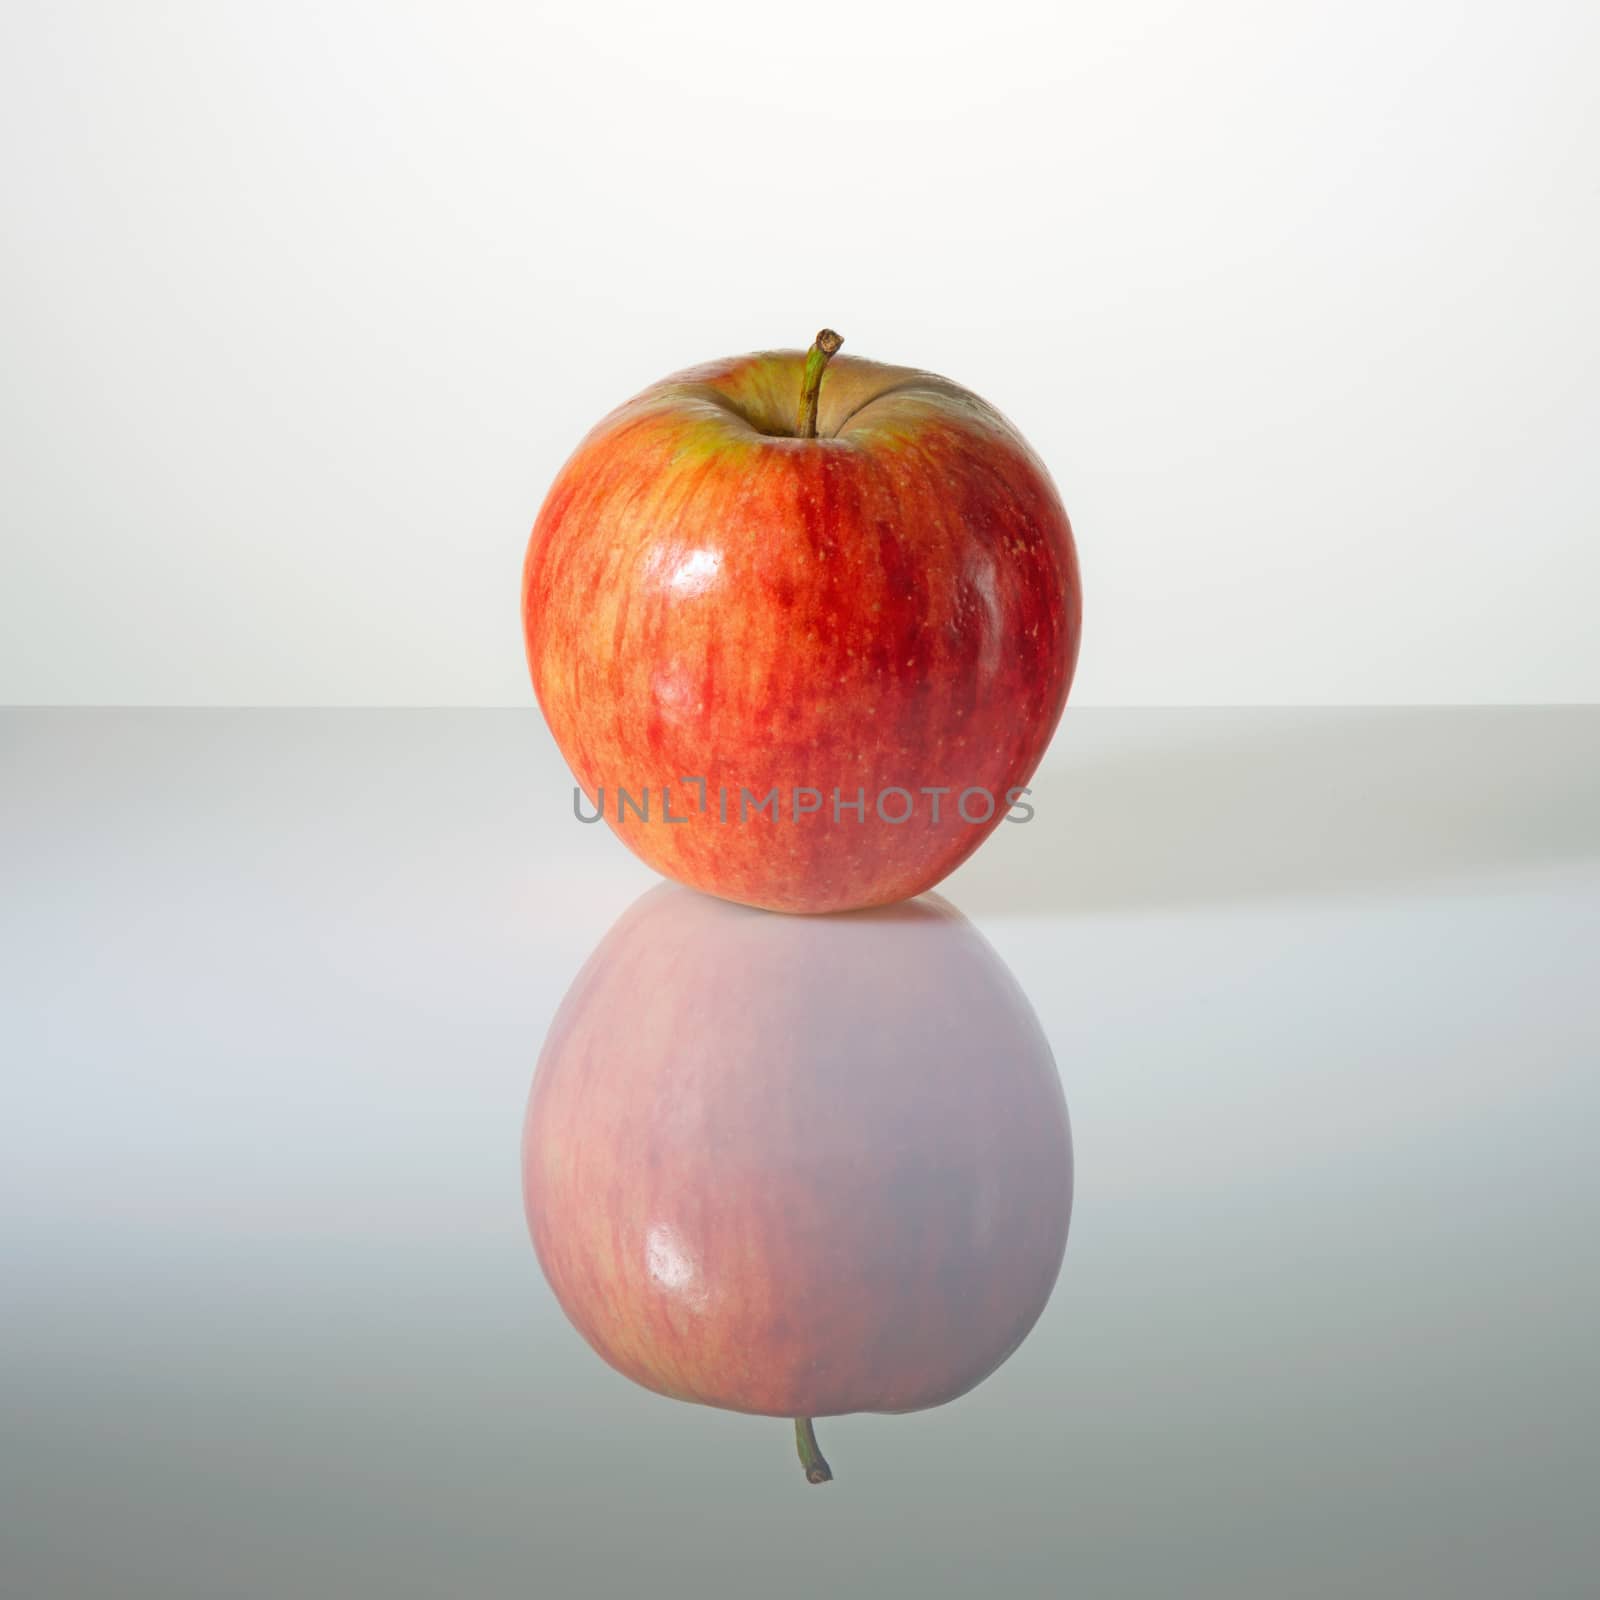 Red elastic apple on a surface with reflection